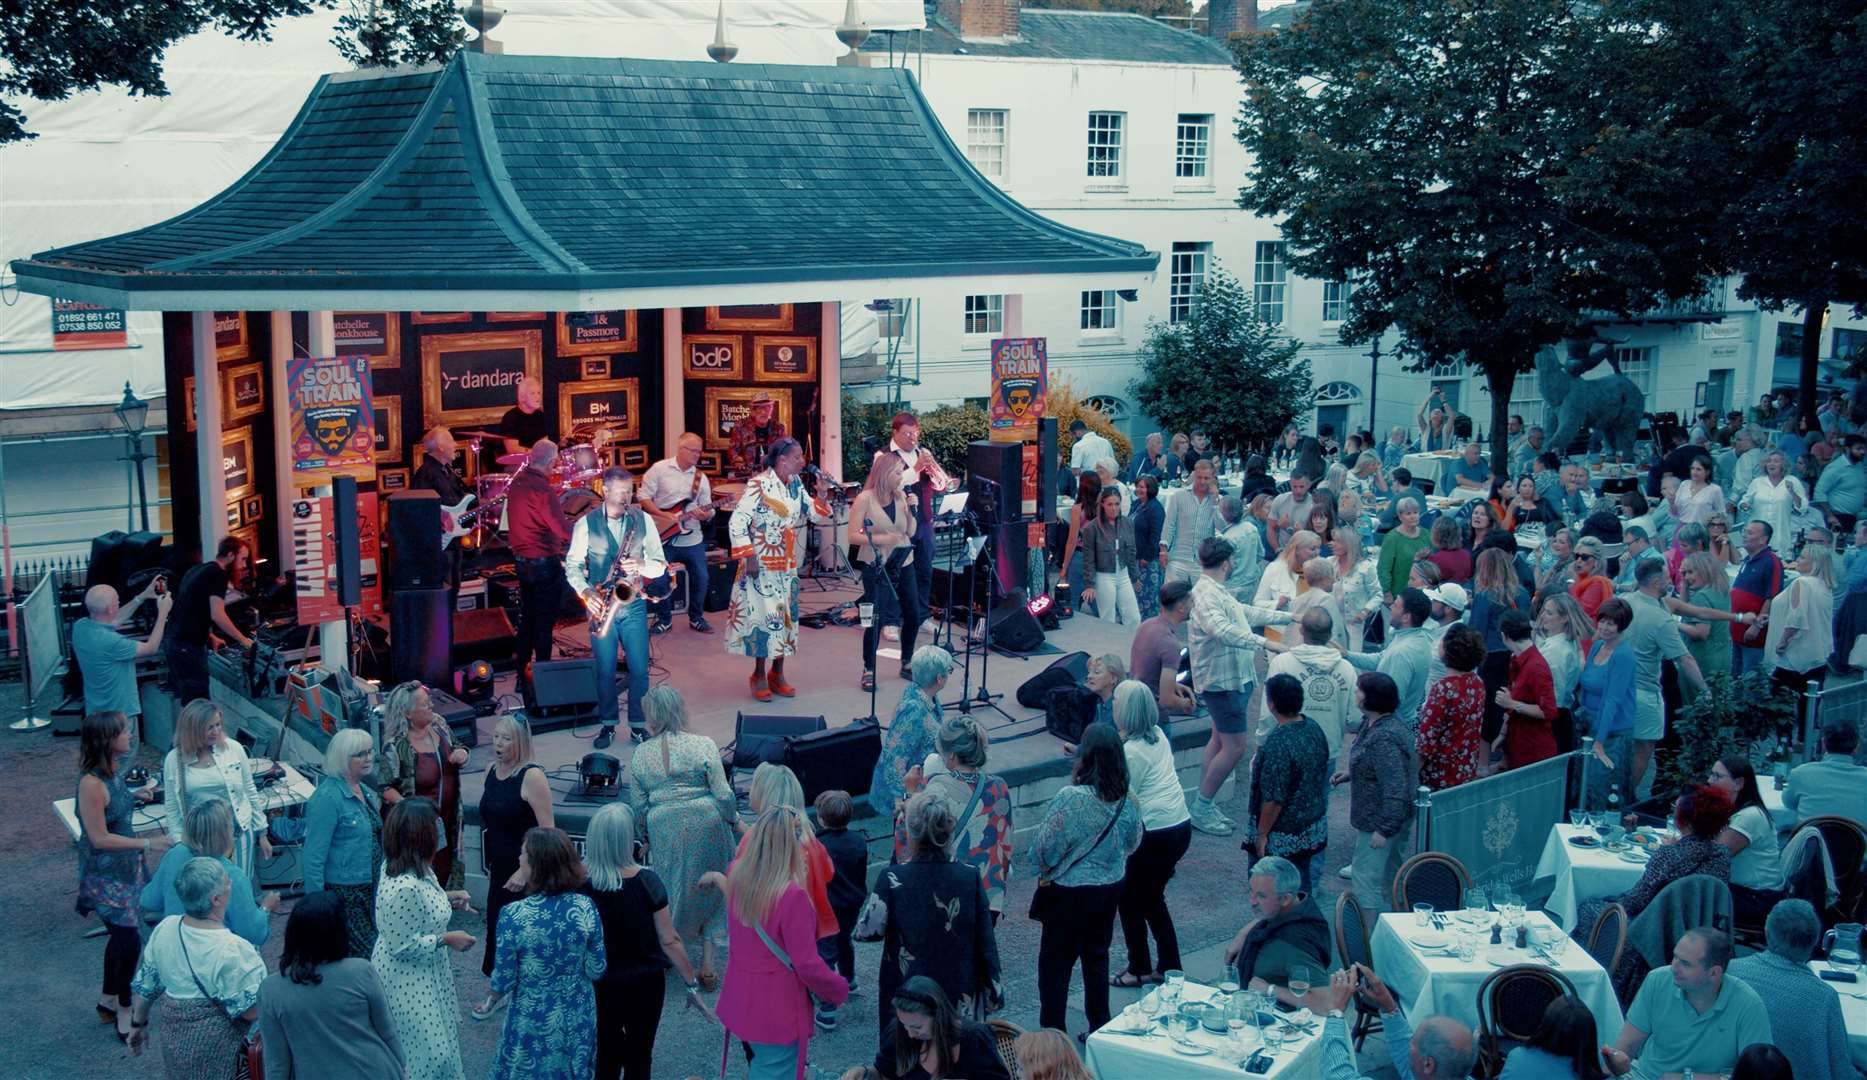 Concert series Live at the Pantiles, previously Jazz on the Pantiles, returns from May. Picture: Live at the Pantiles